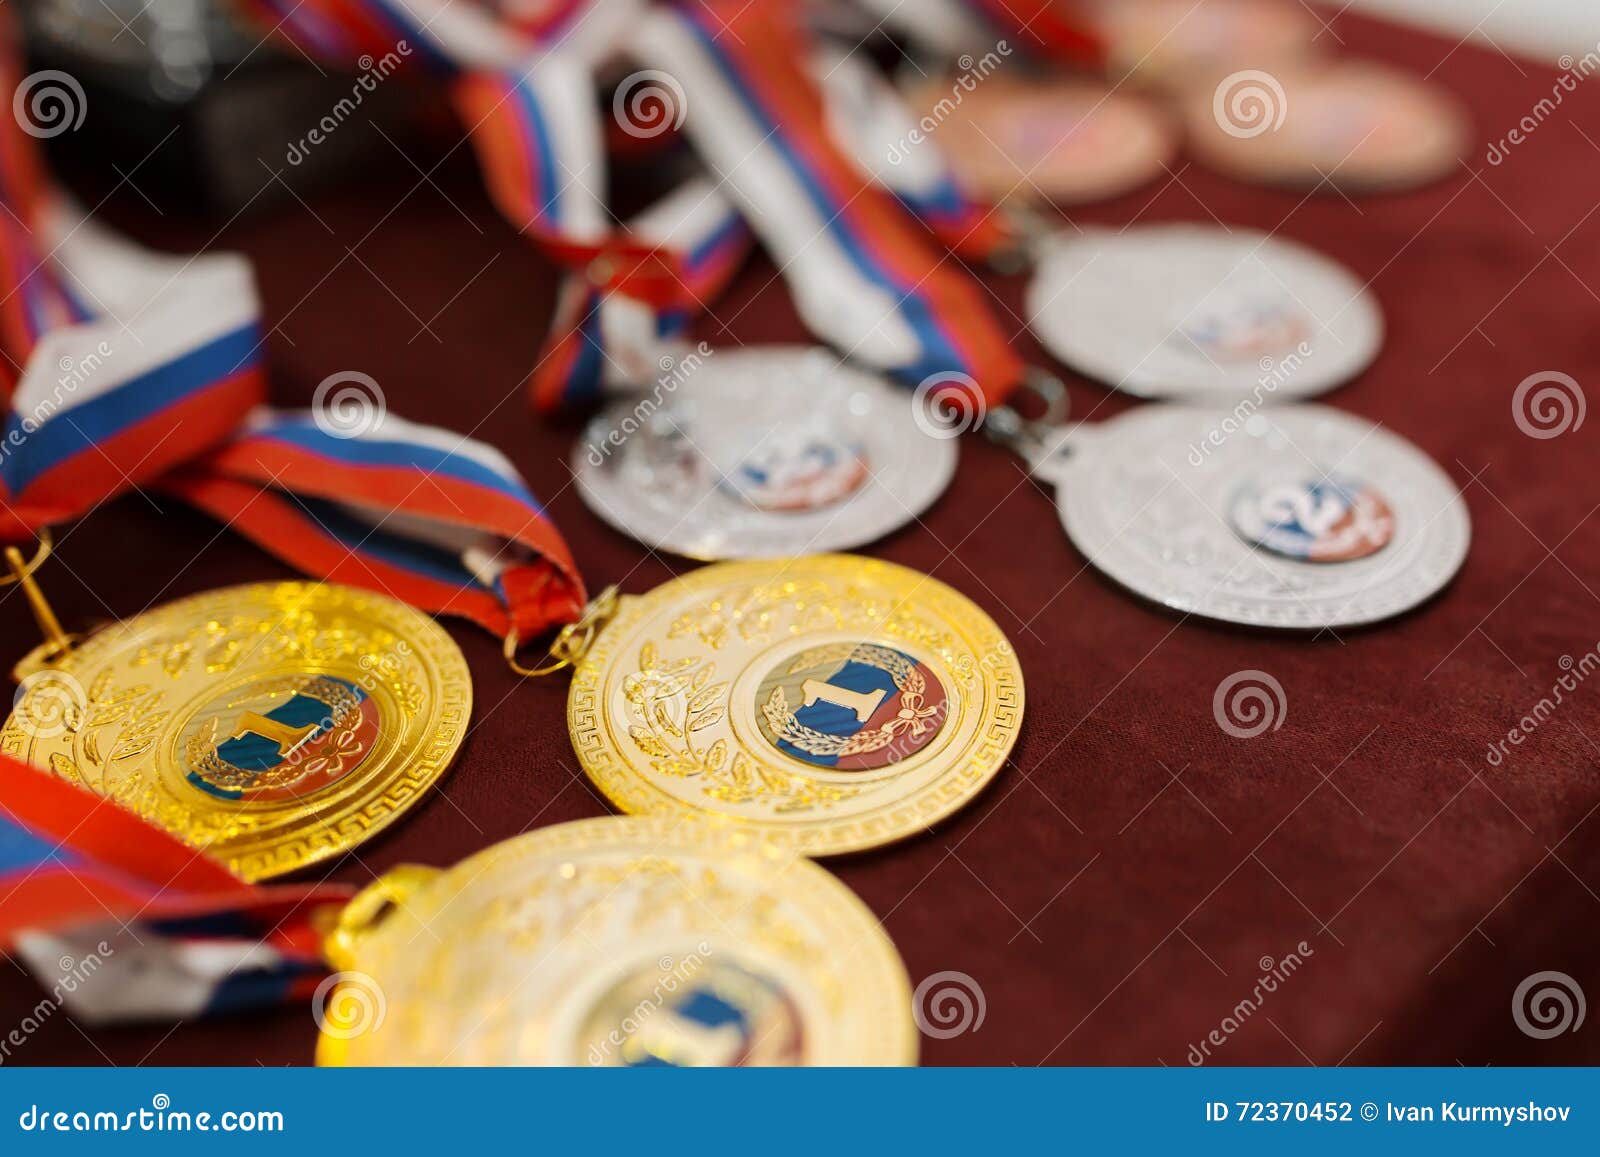 vanquish the medals for the competition on table